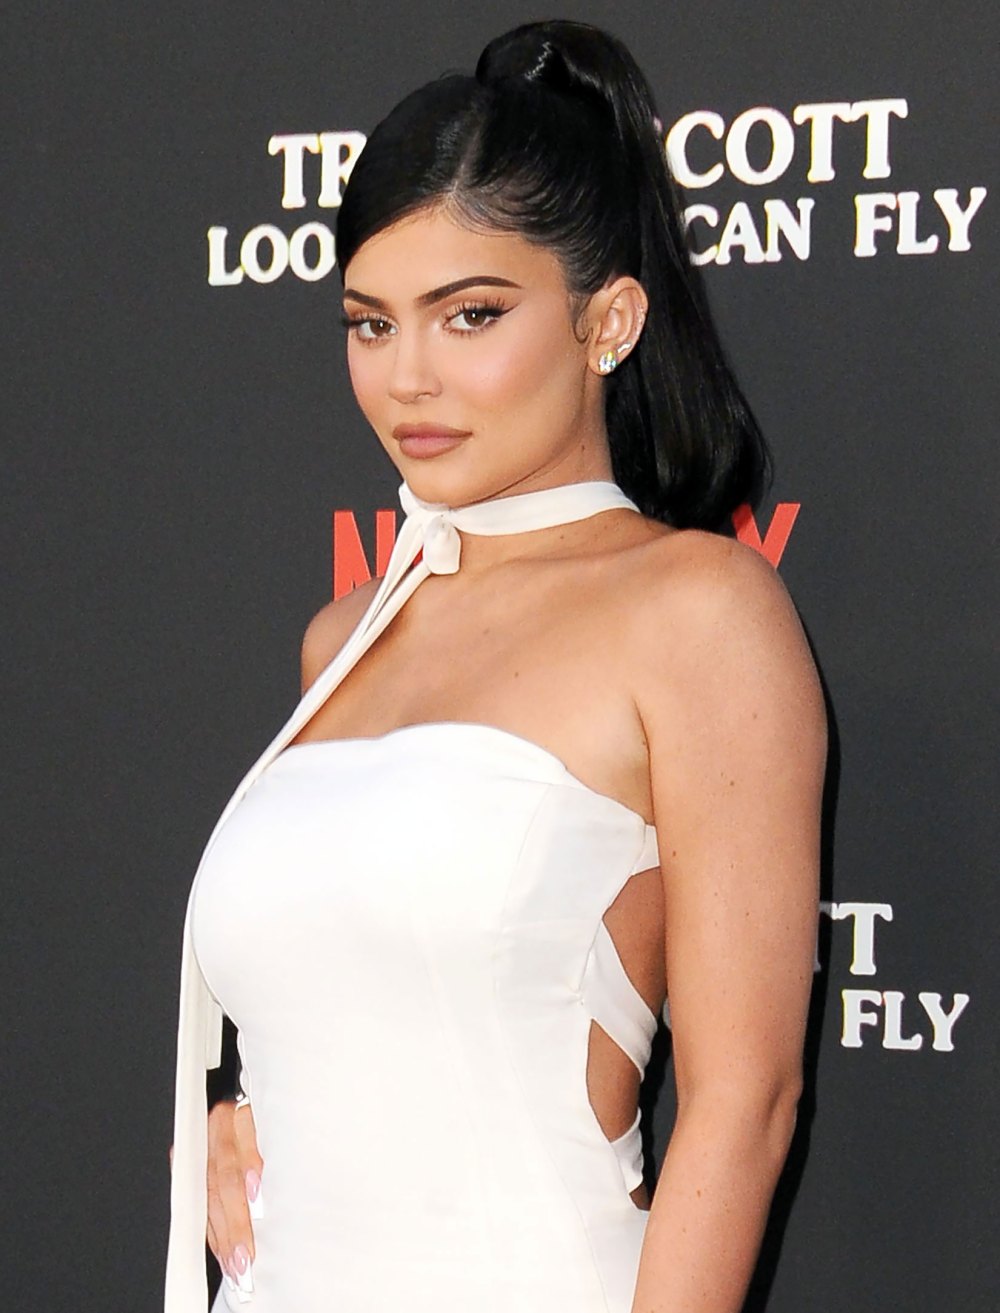 Kylie Jenner Says She Thinks About Having More Kids ‘Every Day’